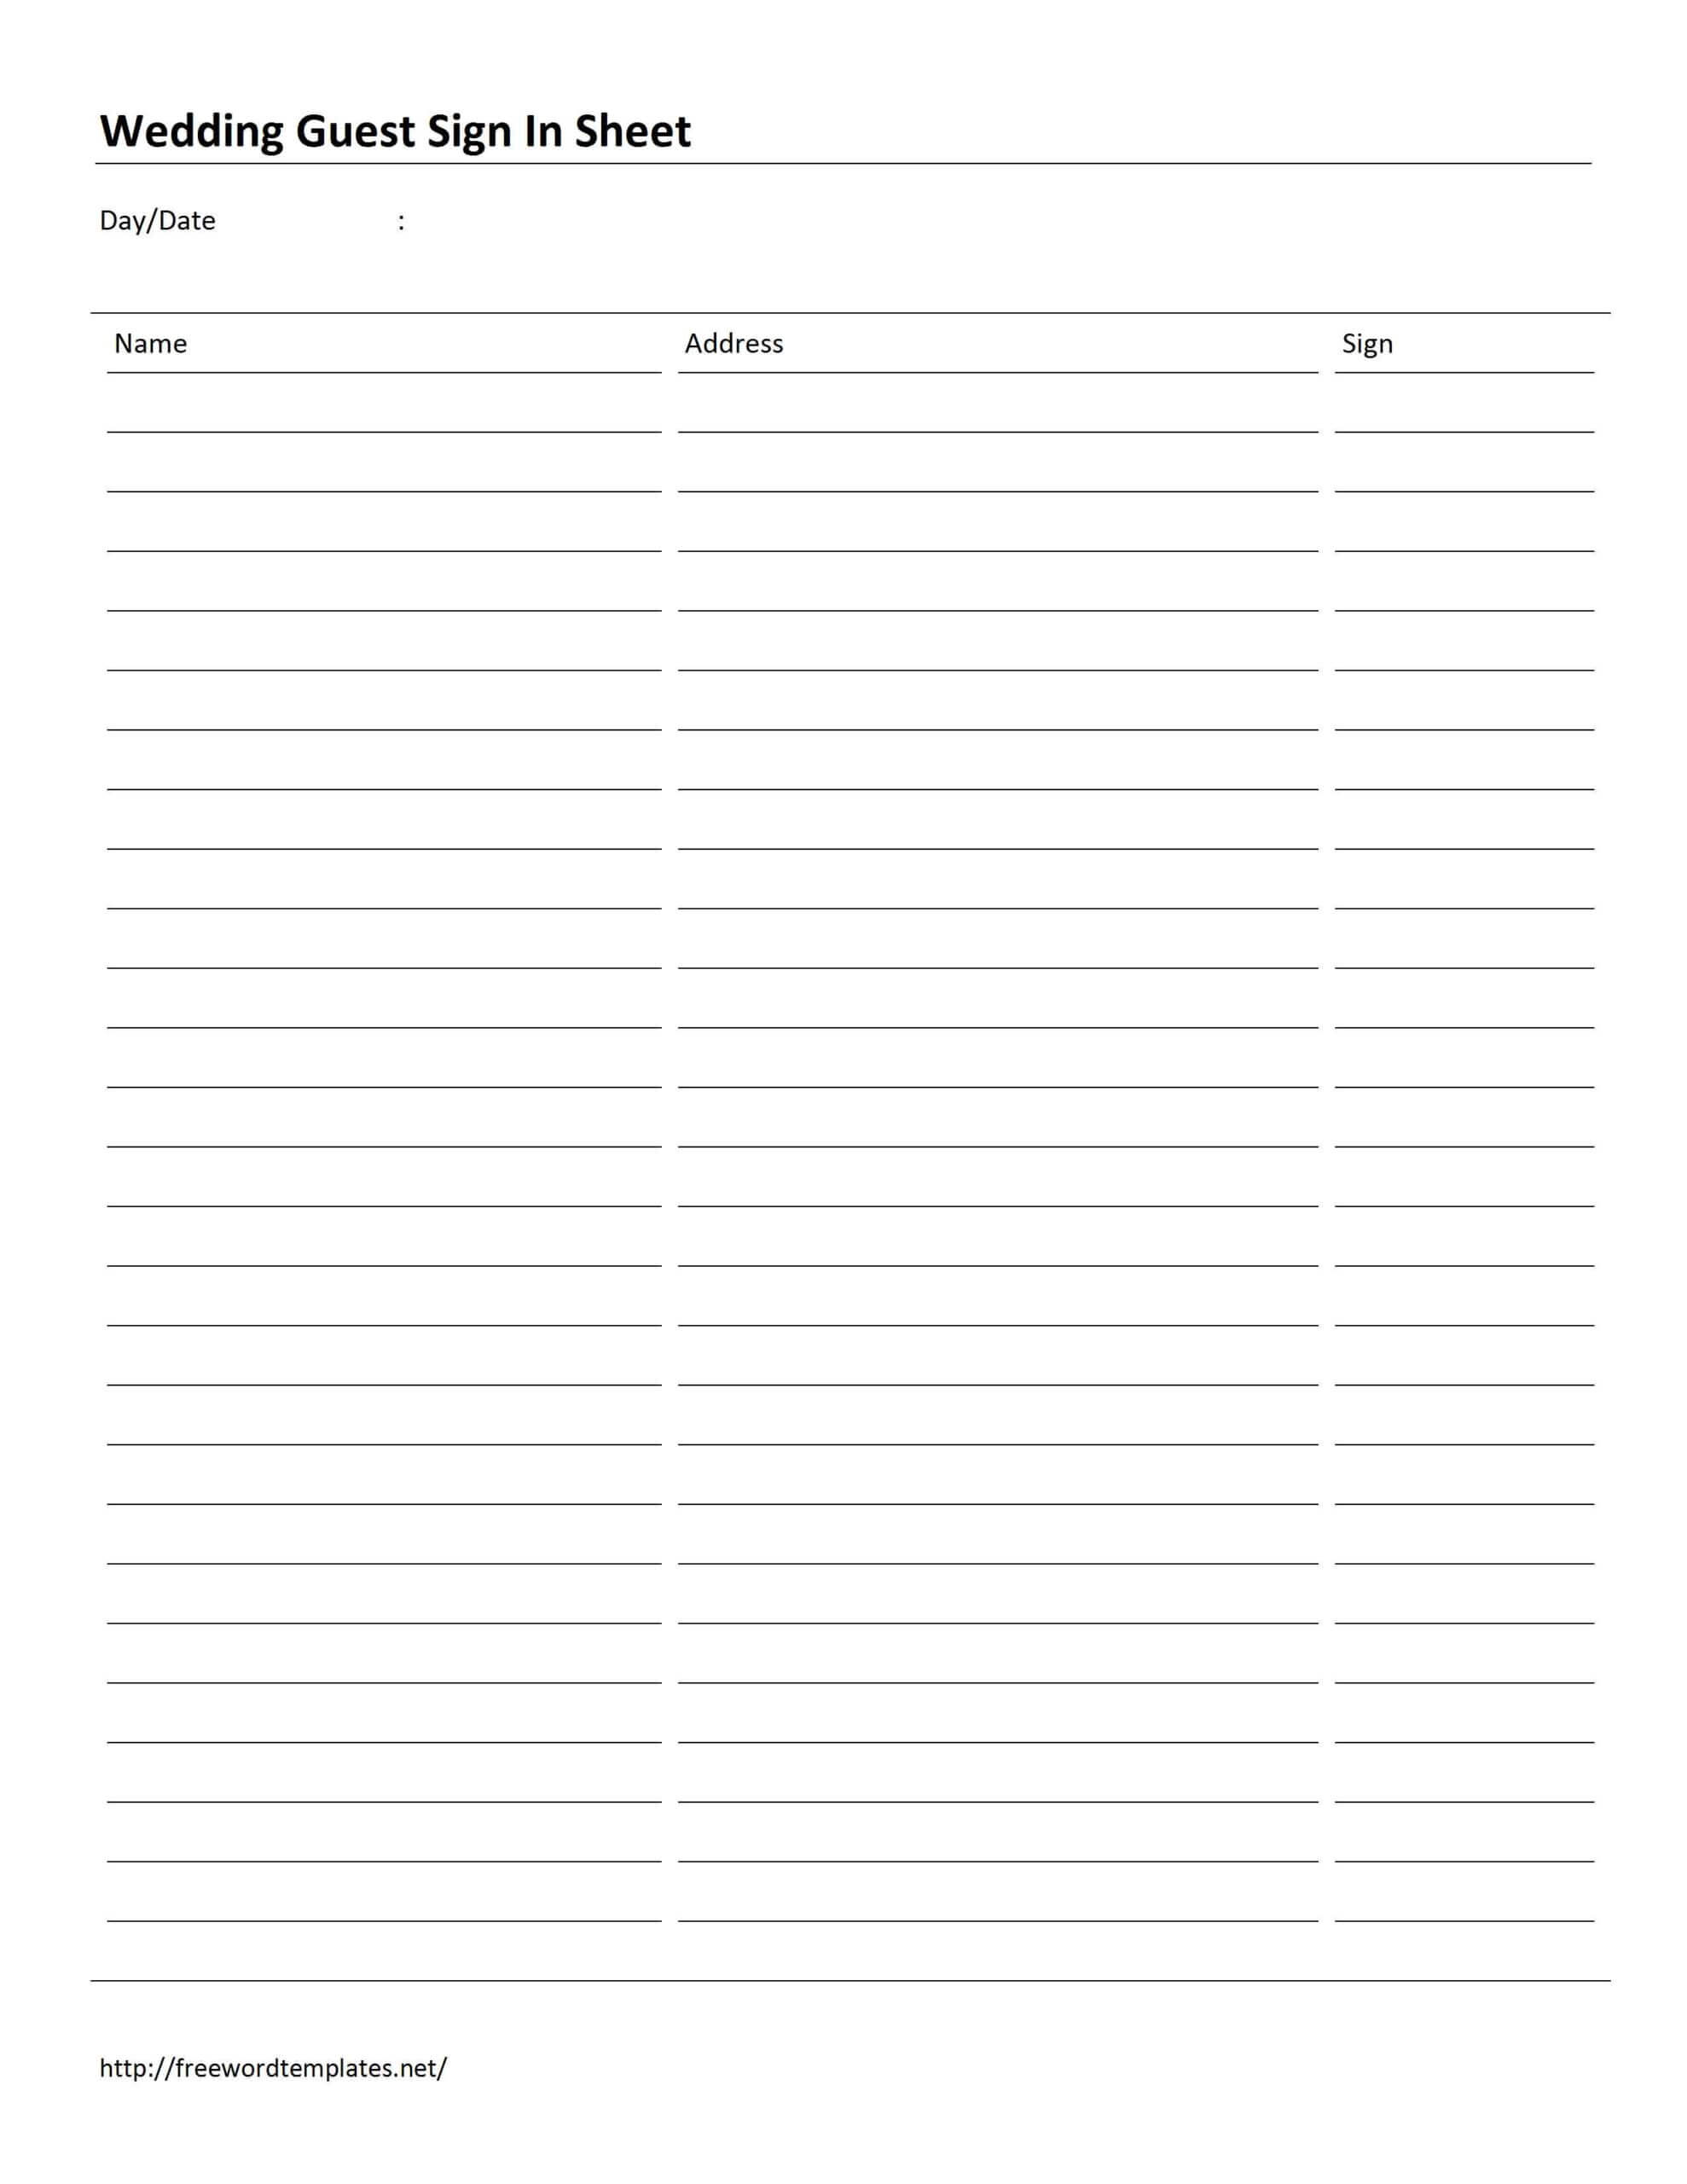 Guest Sign In Sheet Template Microsoft Word | Customer In 3 Column Word Template